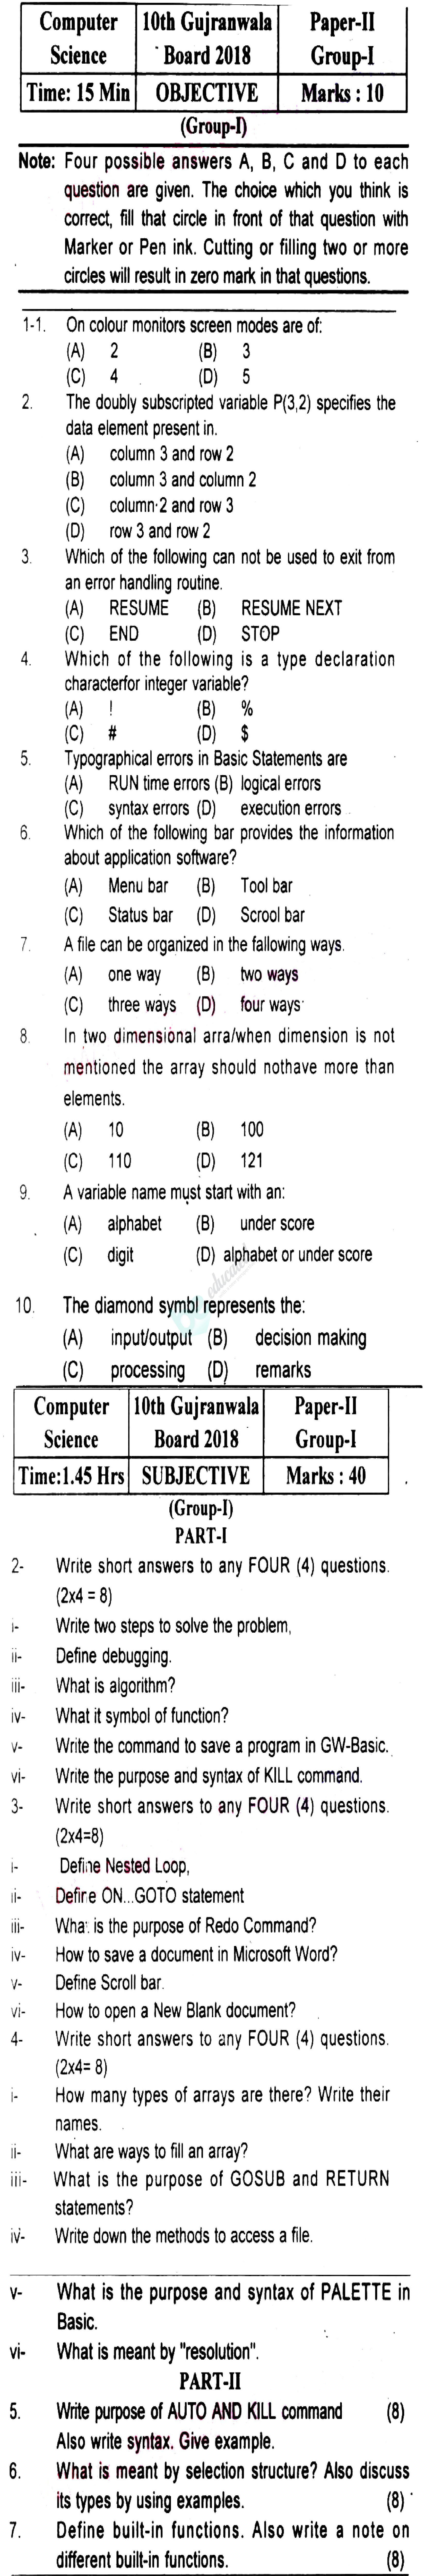 Computer Science 10th English Medium Past Paper Group 1 BISE Gujranwala 2018